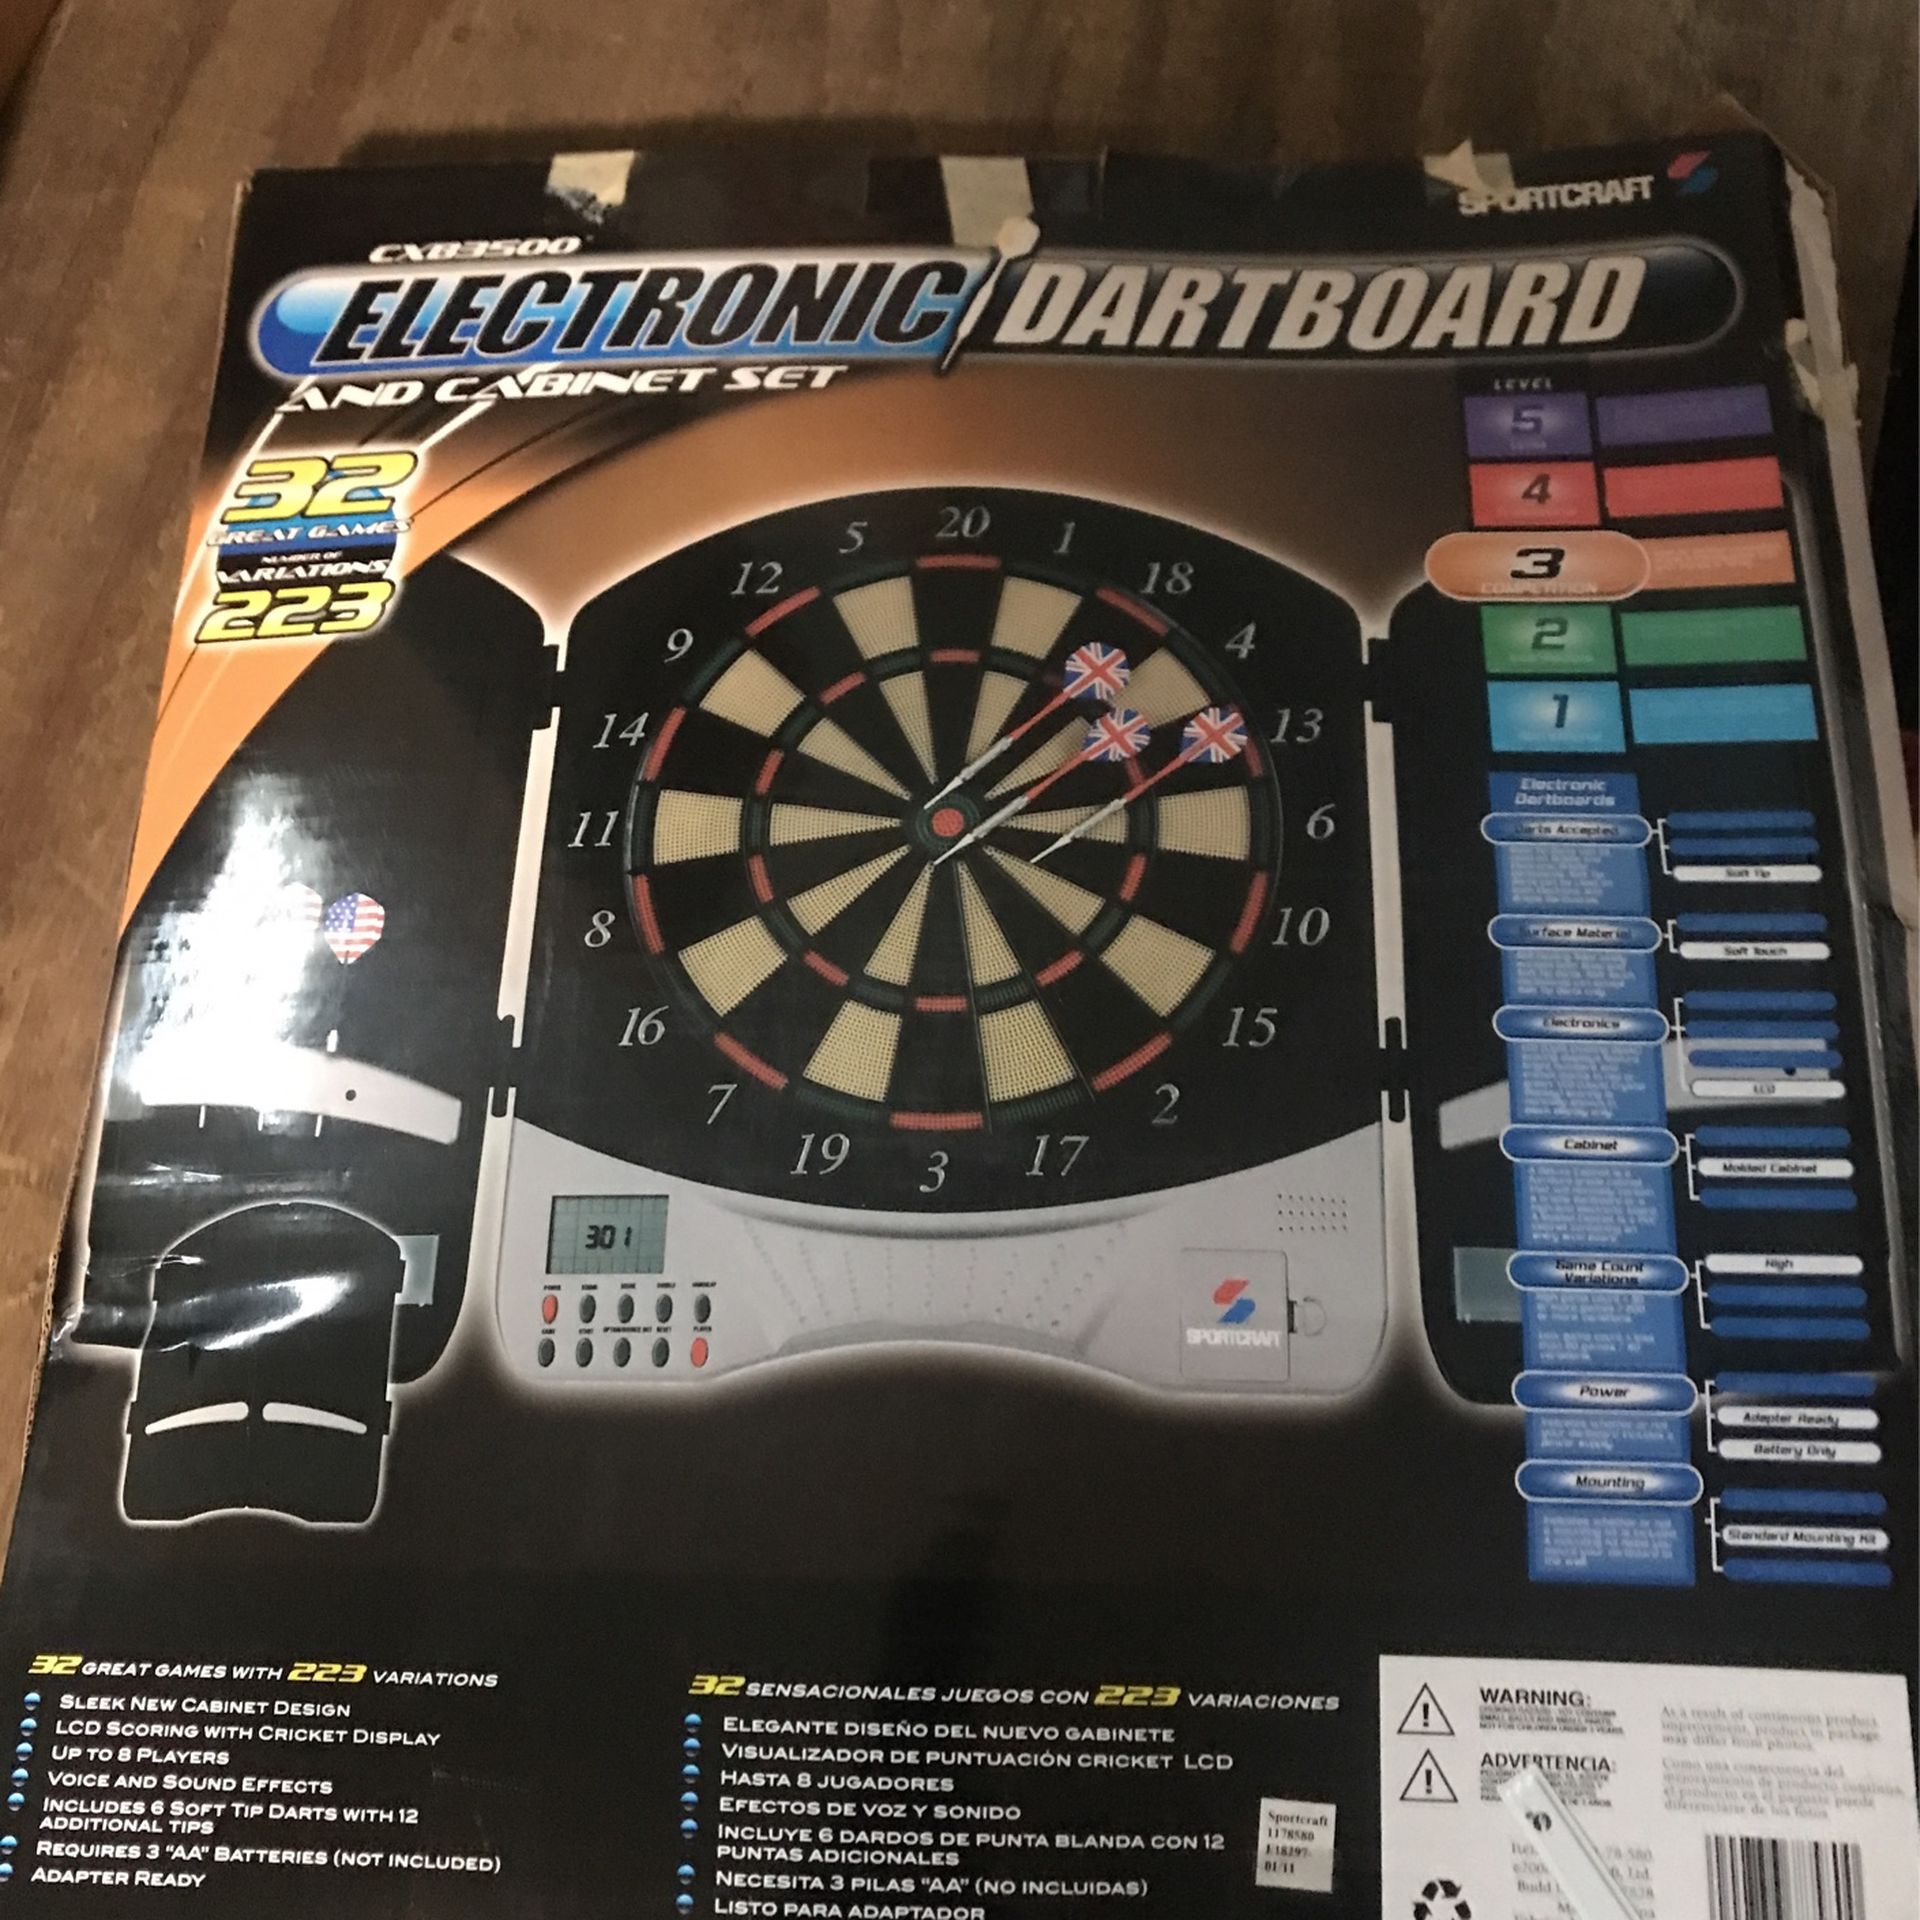 Electronic dartboard and cabinet set from Sportscraft. (contact info removed)